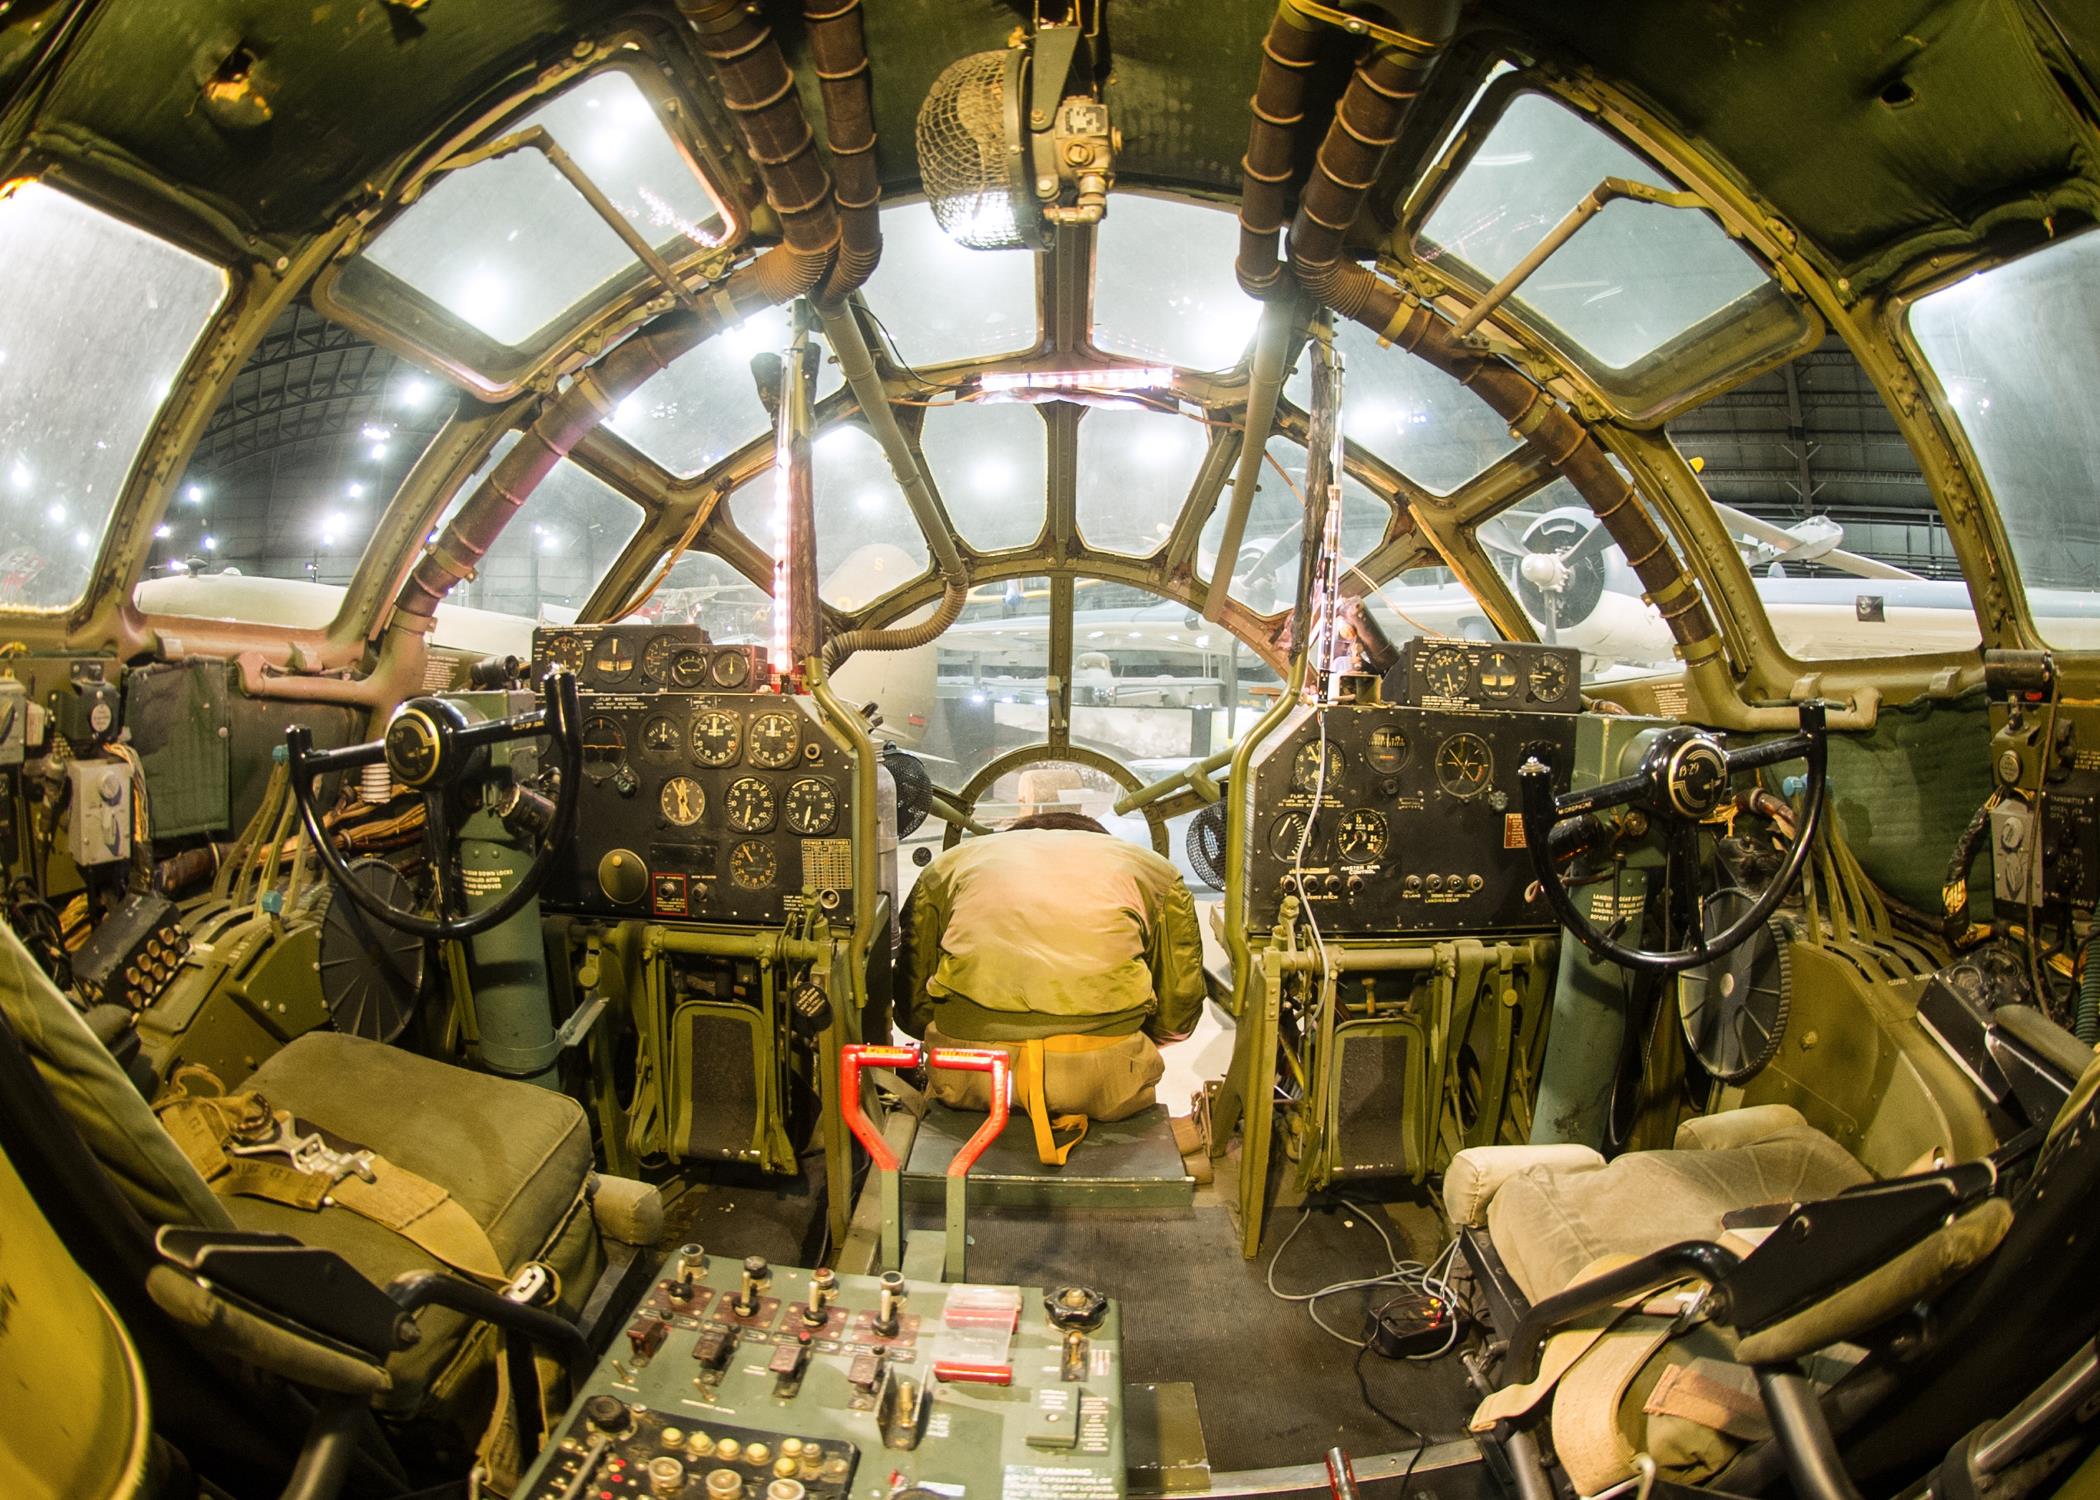 Cockpit of a B-29 at the National Museum of the United States Air Force, Dayton, OH.